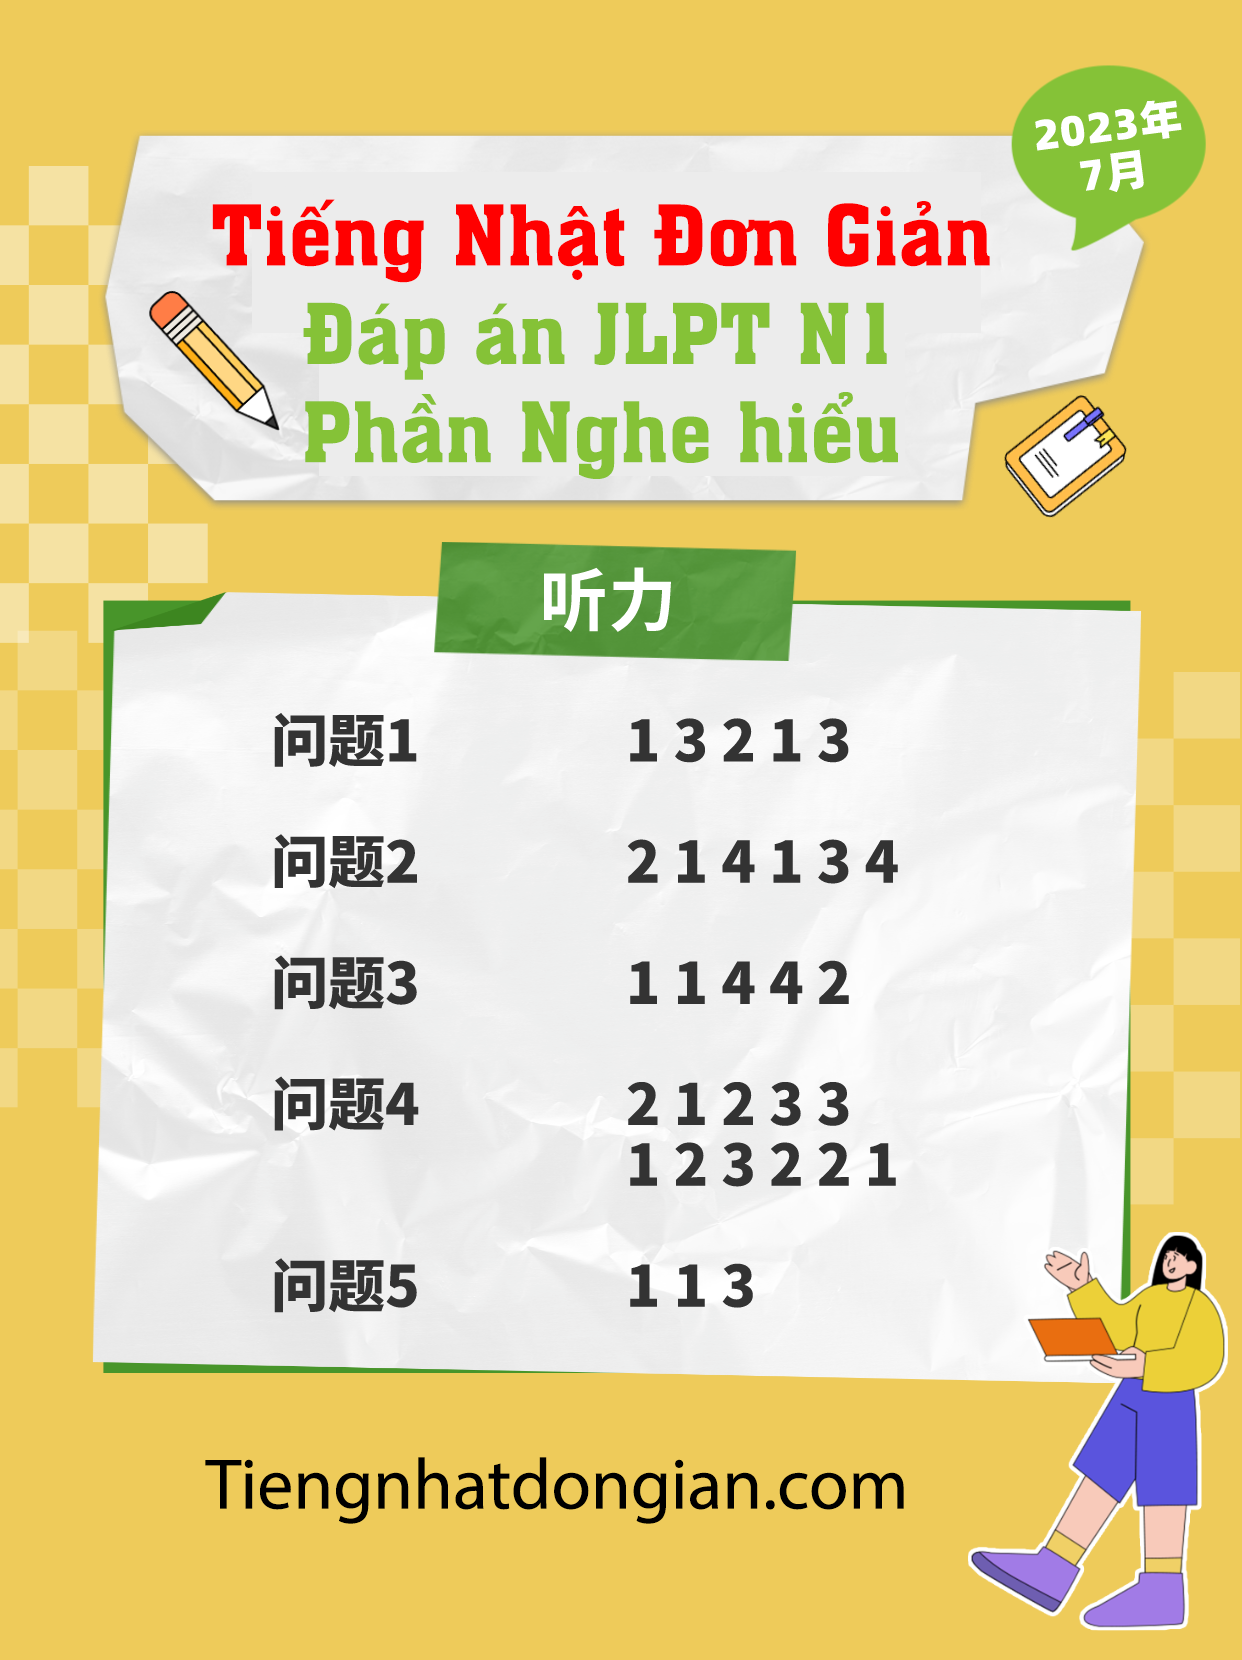 4 Nghe